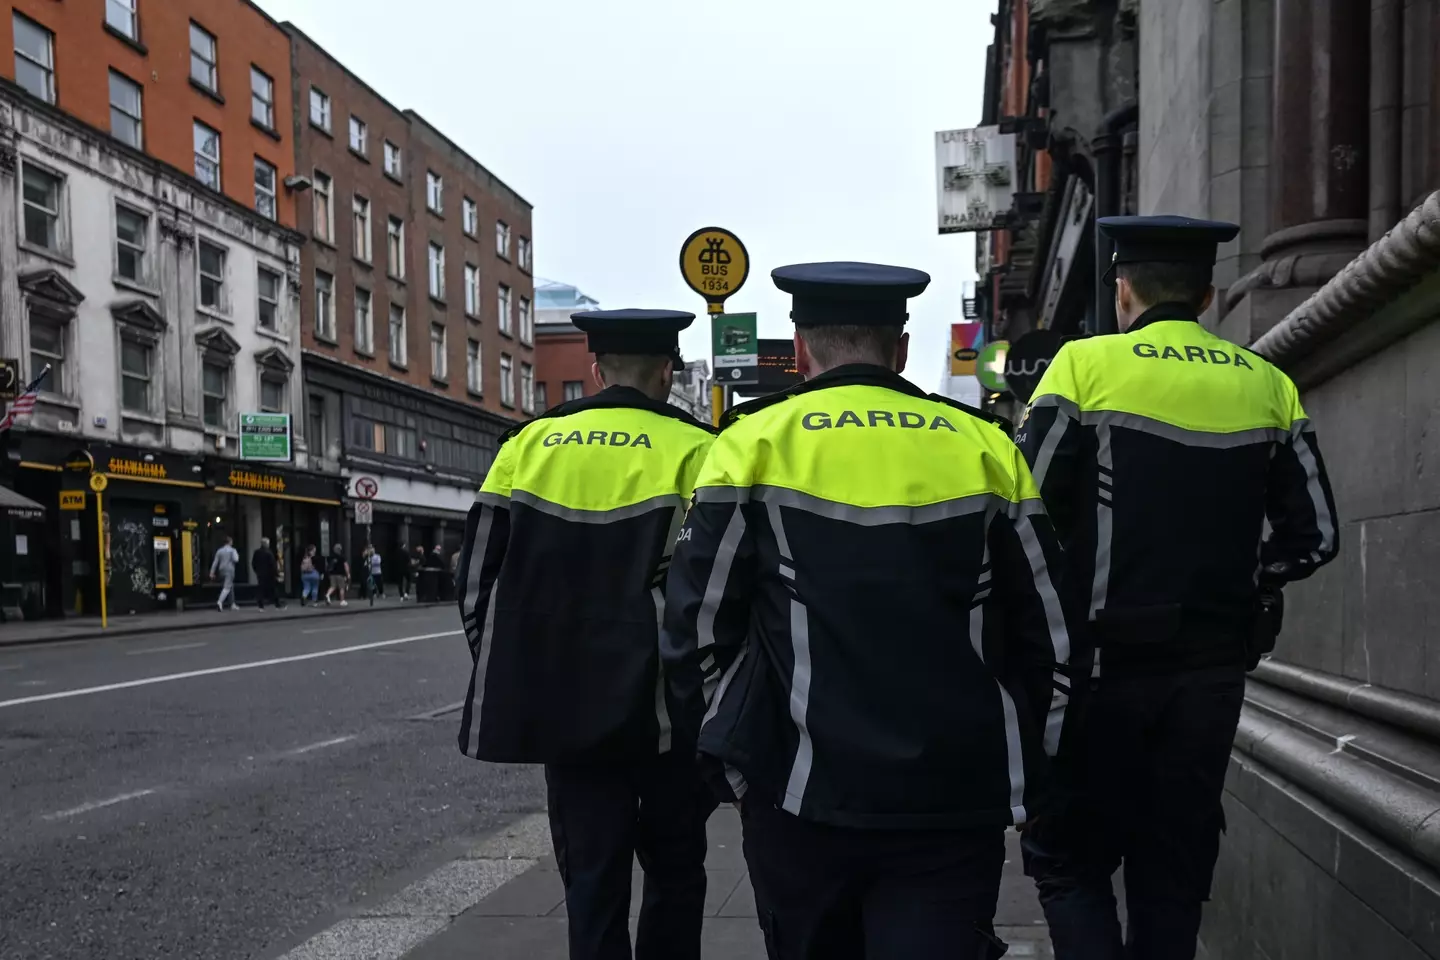 Cops in Dublin and Spain have had their work cut out for them amid the Hutch-Kinahan feud. (Artur Widak/NurPhoto via Getty Images)